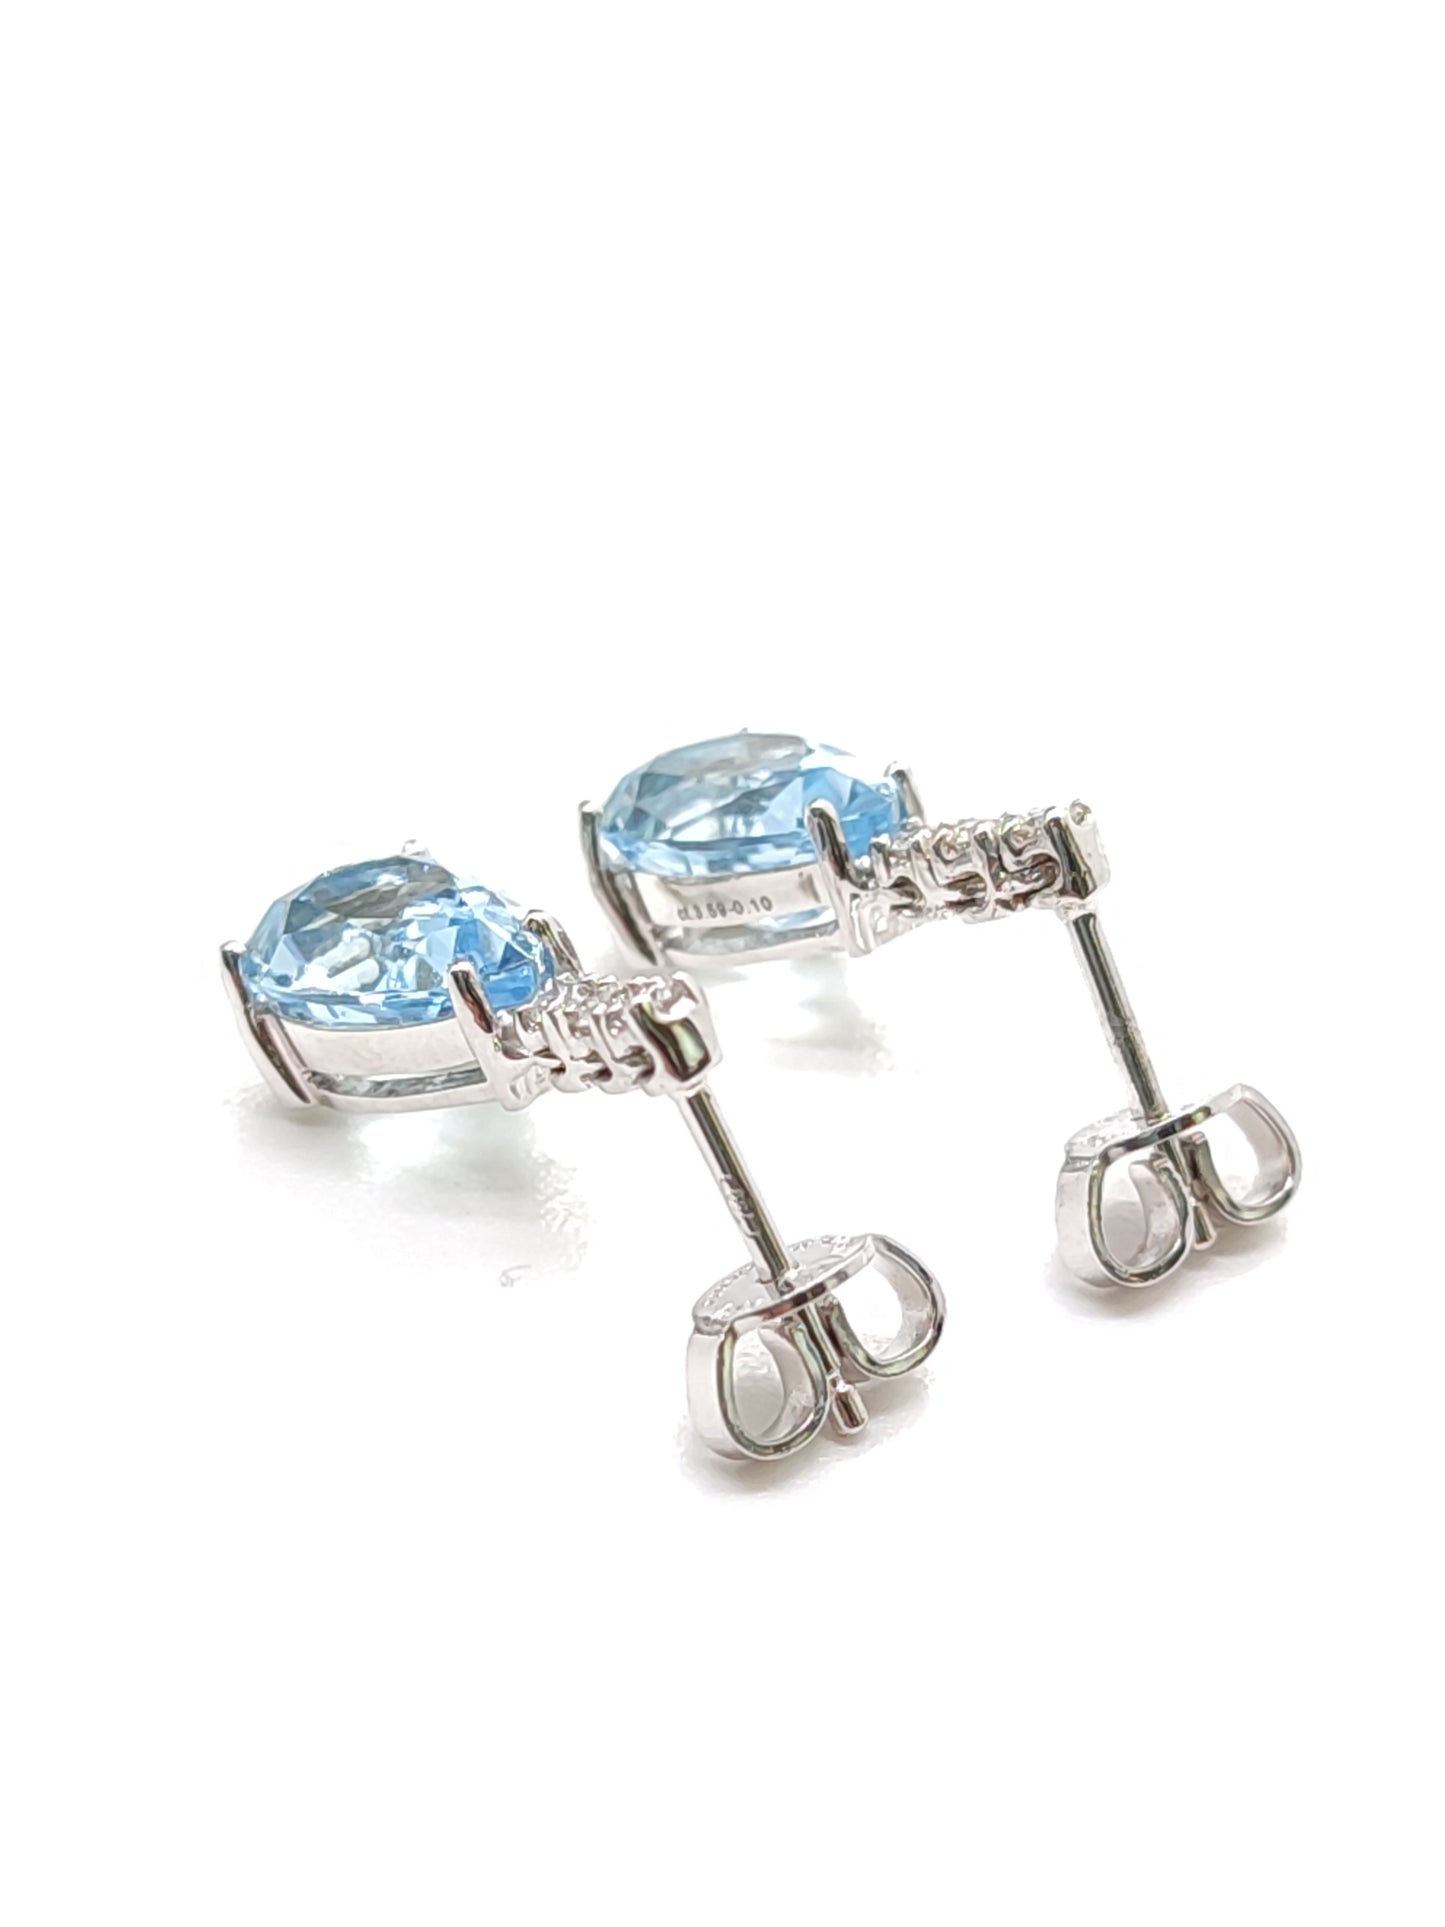 Gold earrings with diamonds and aquamarine